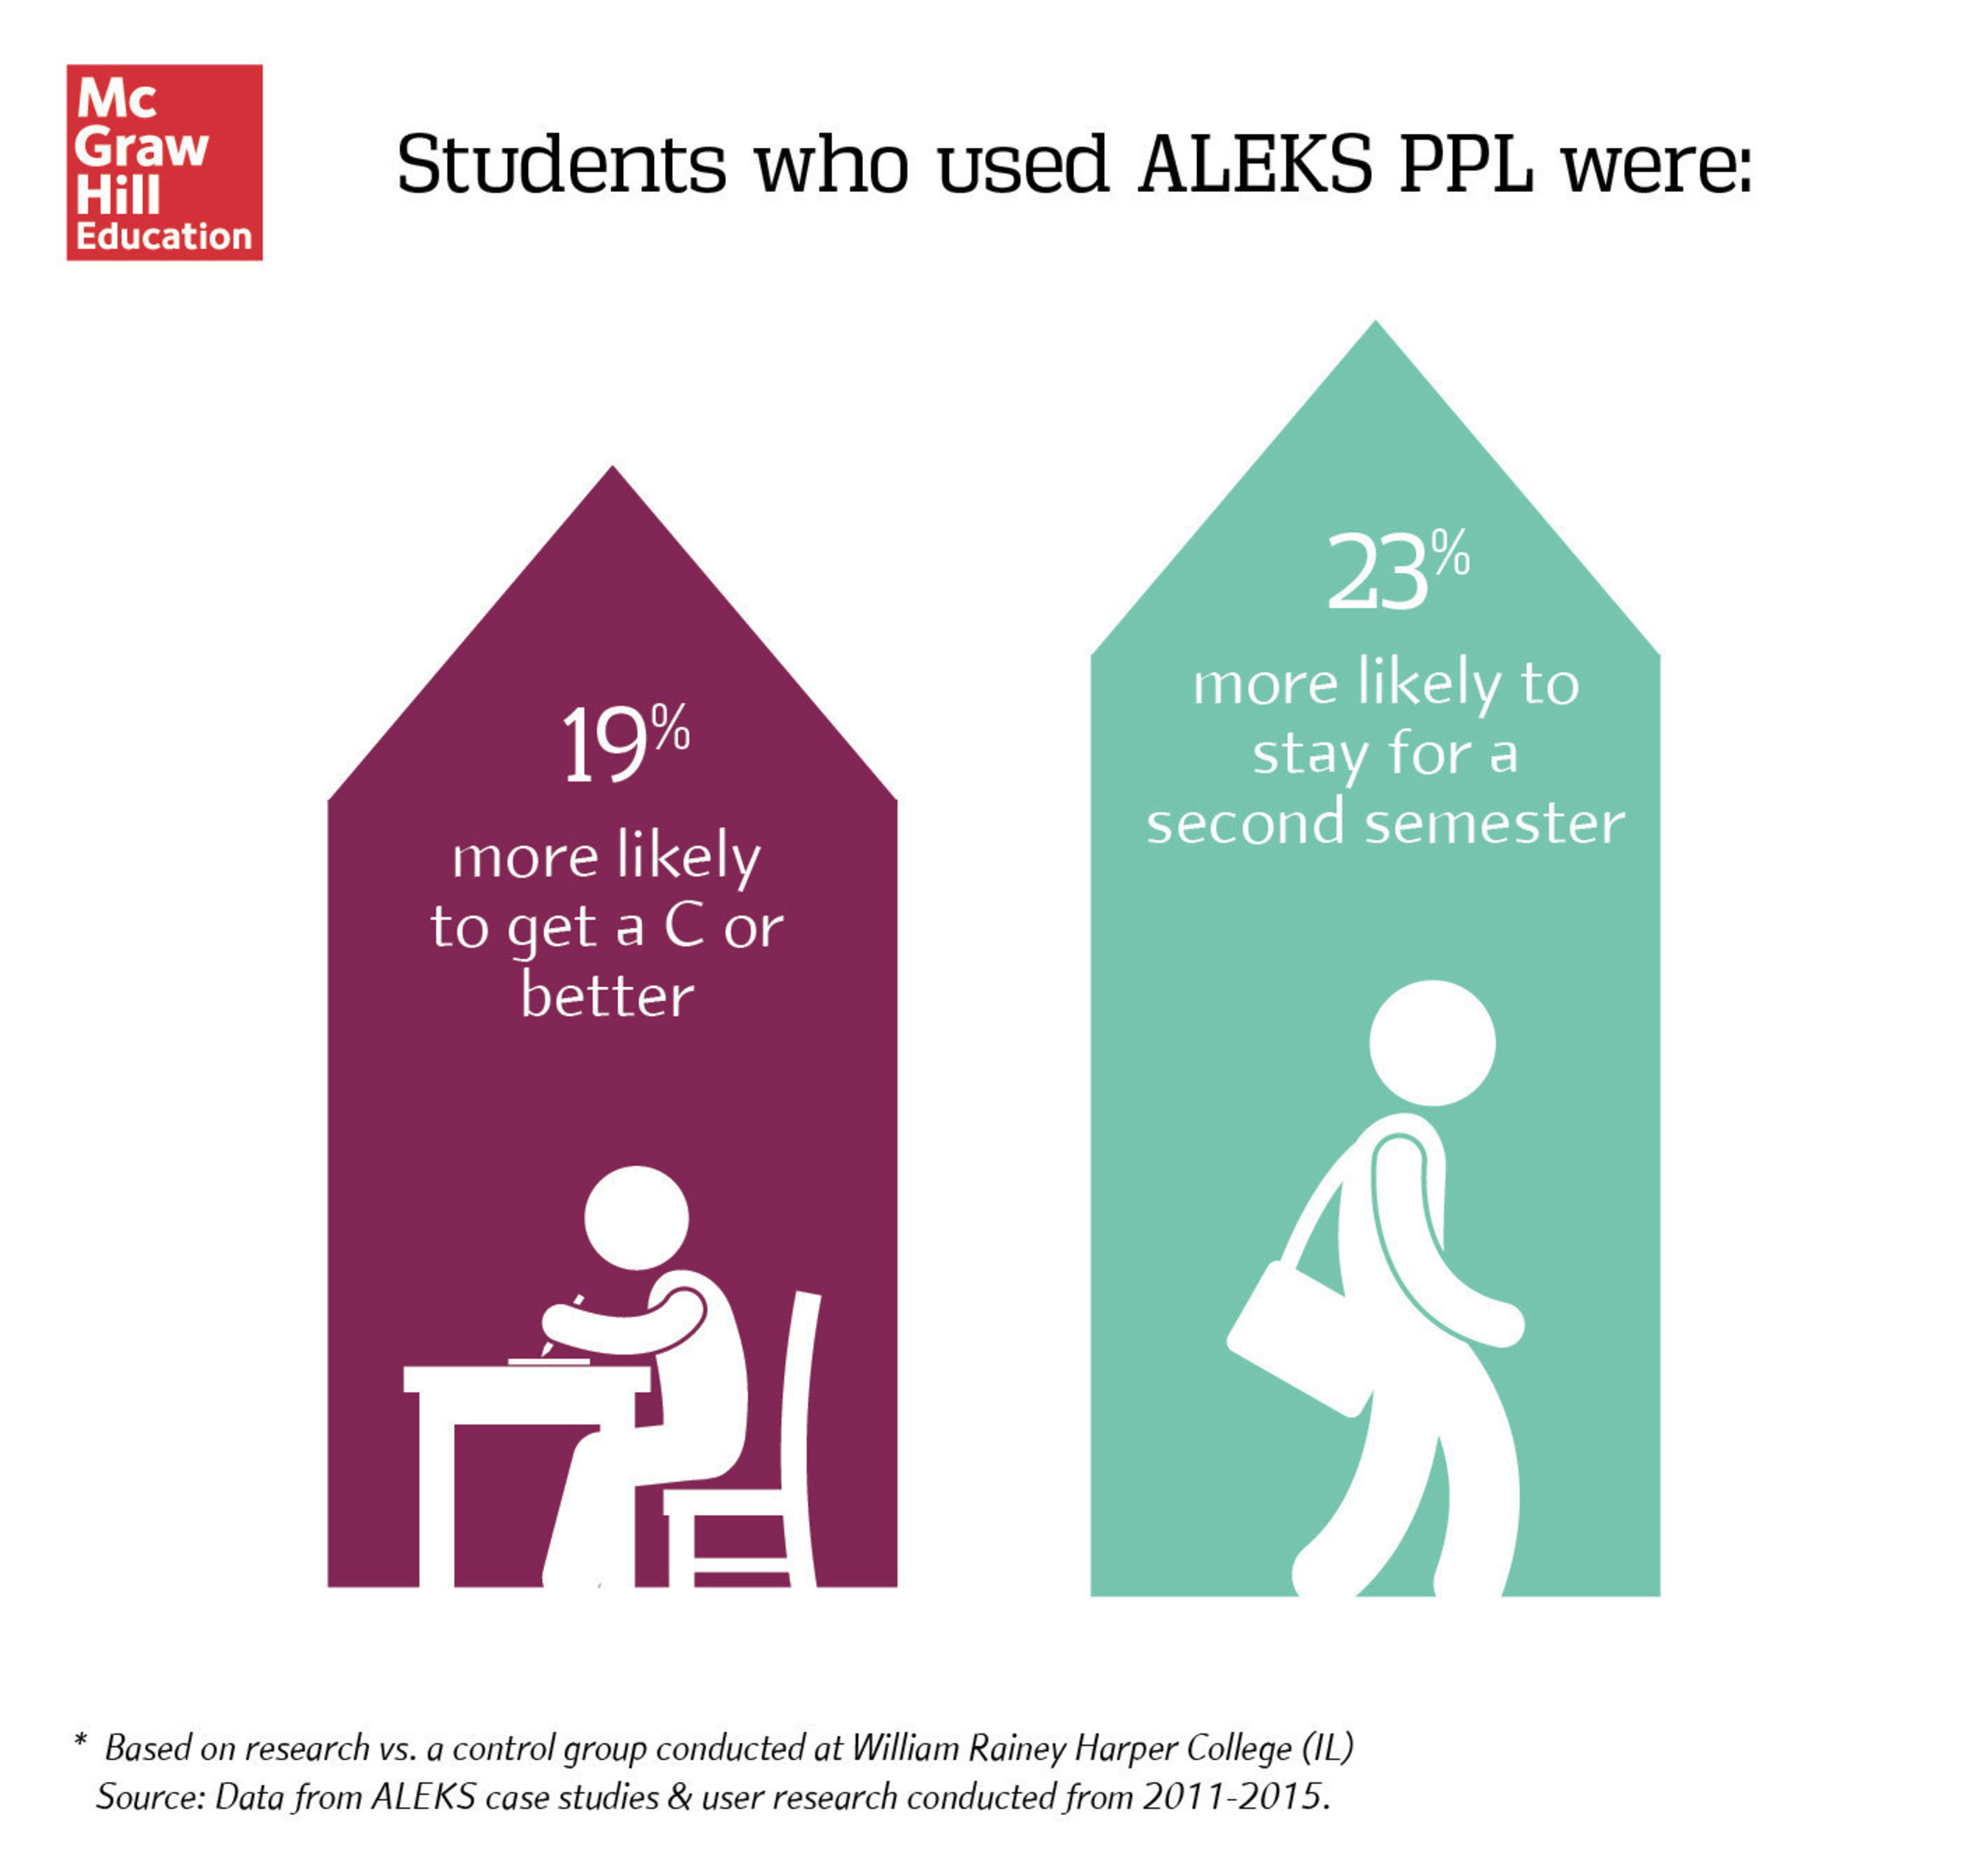 Students who used ALEKS PPL were more likely to get higher grades and to return for a second semester of college.